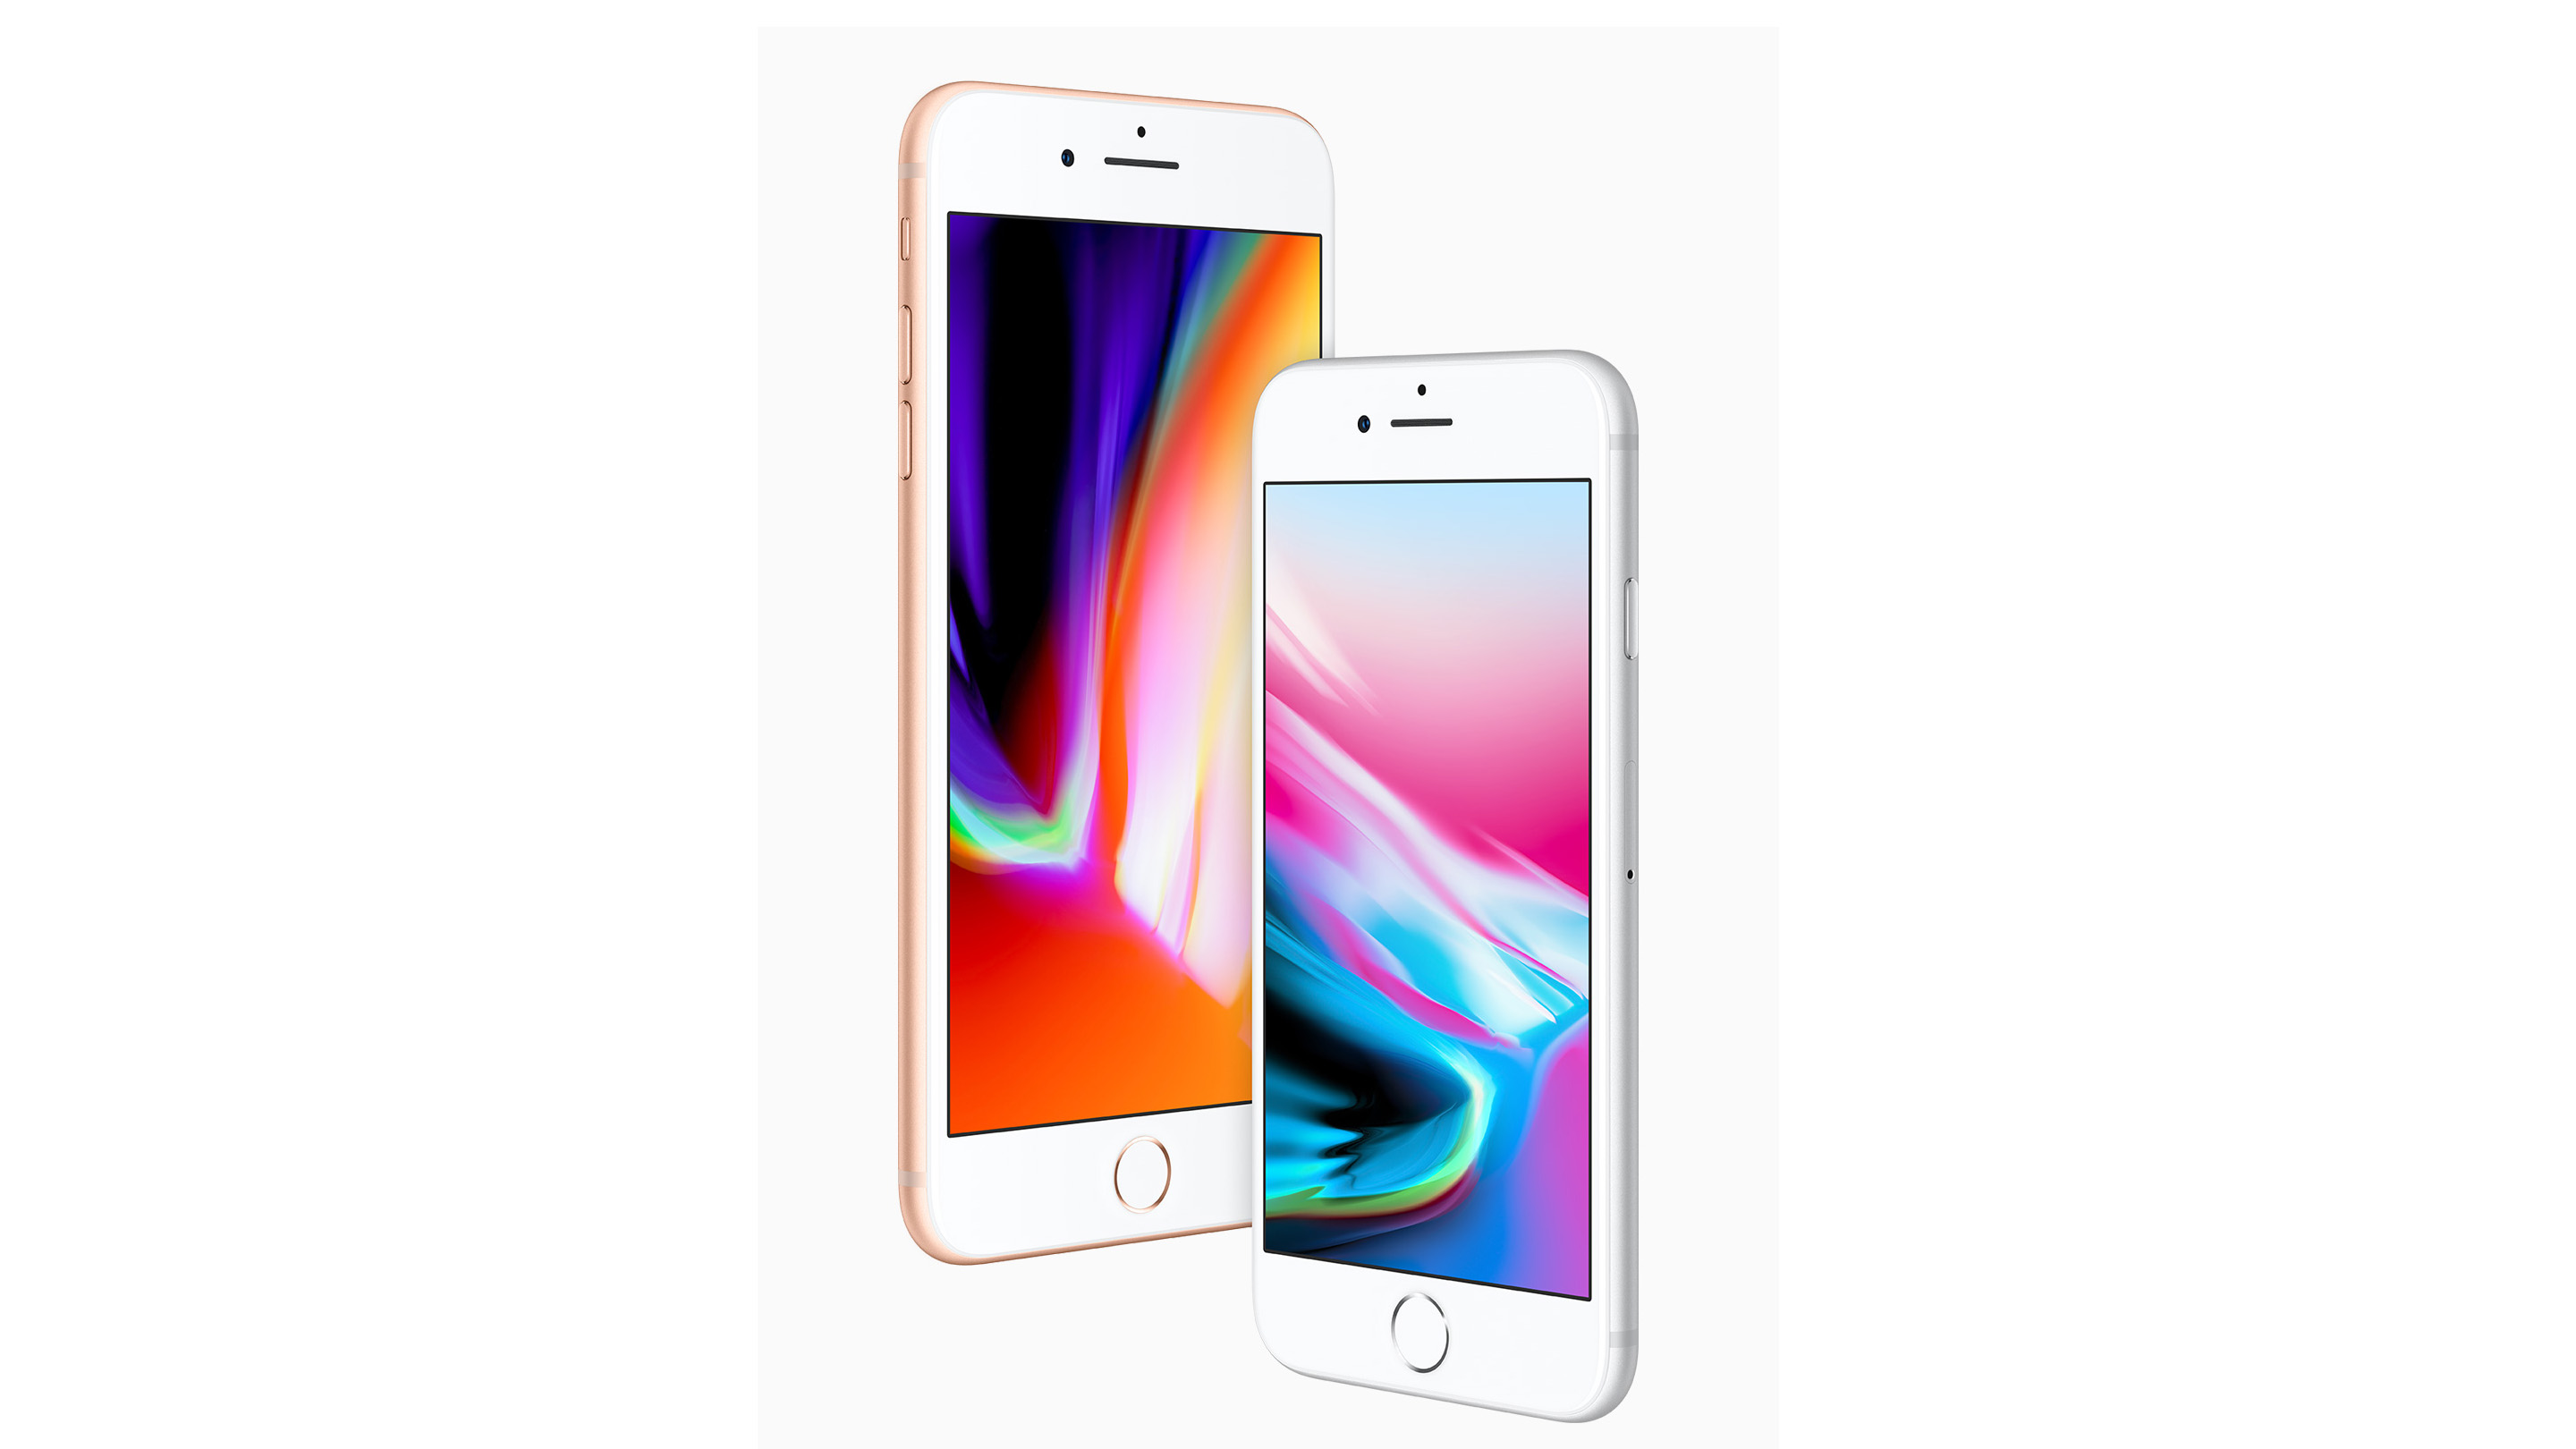 Apple iPhone X, iPhone 8 and iPhone 8 Plus Indian pricing and availability